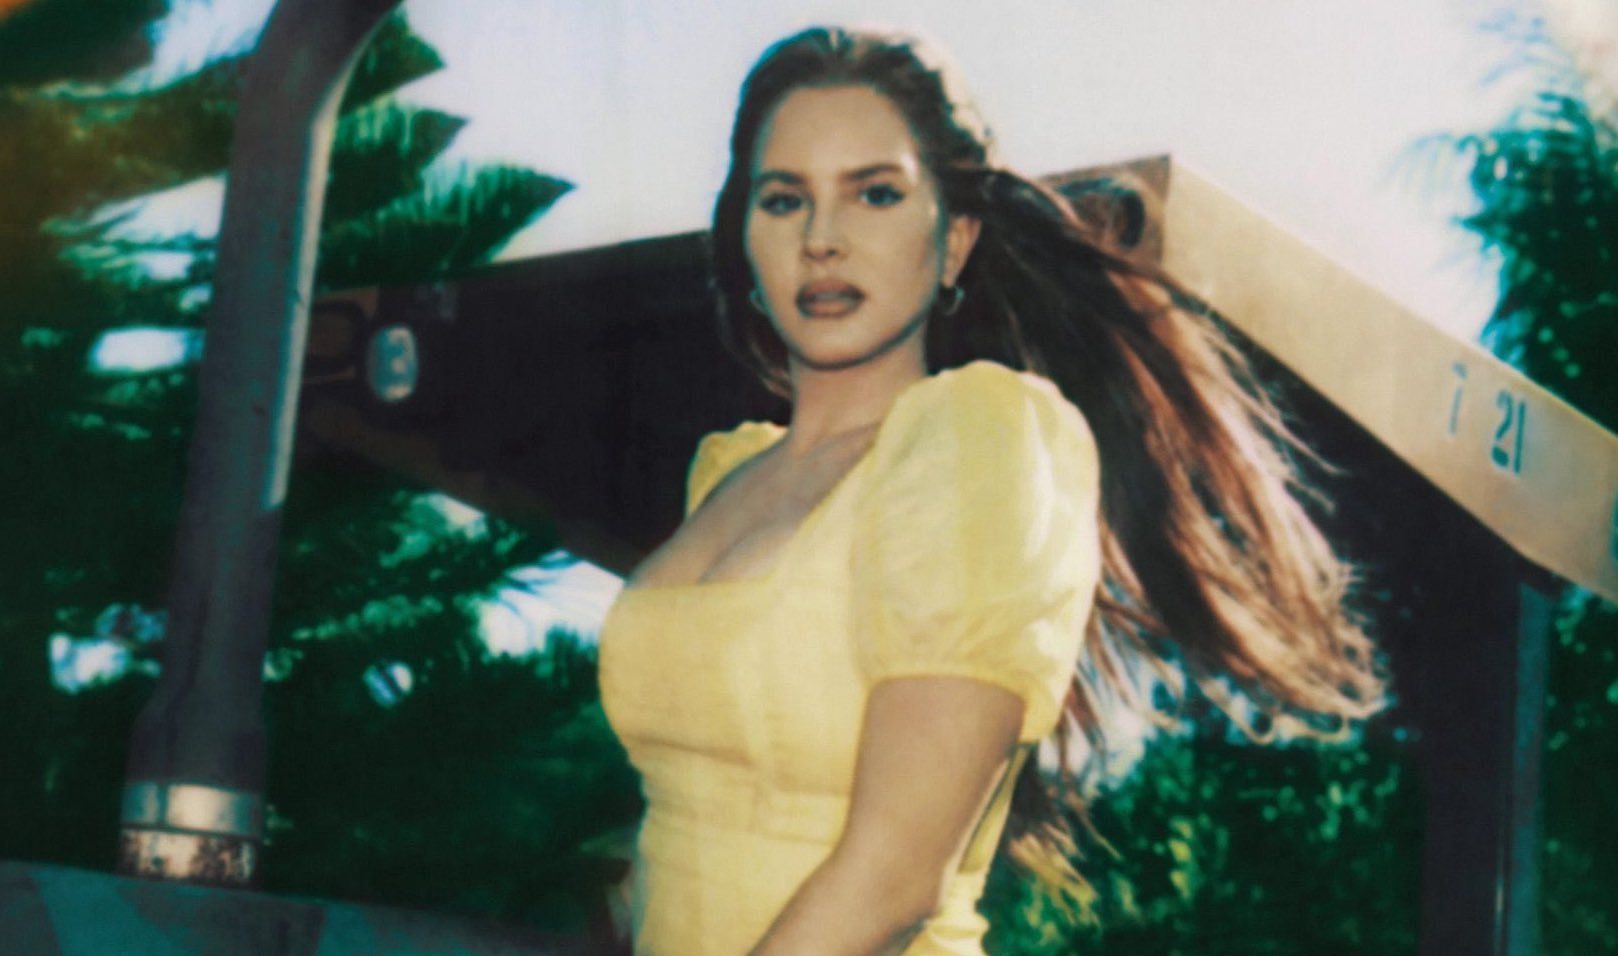 Every Lana Del Rey Album Ranked, from 'Born to Die' to 'Blue Banisters'